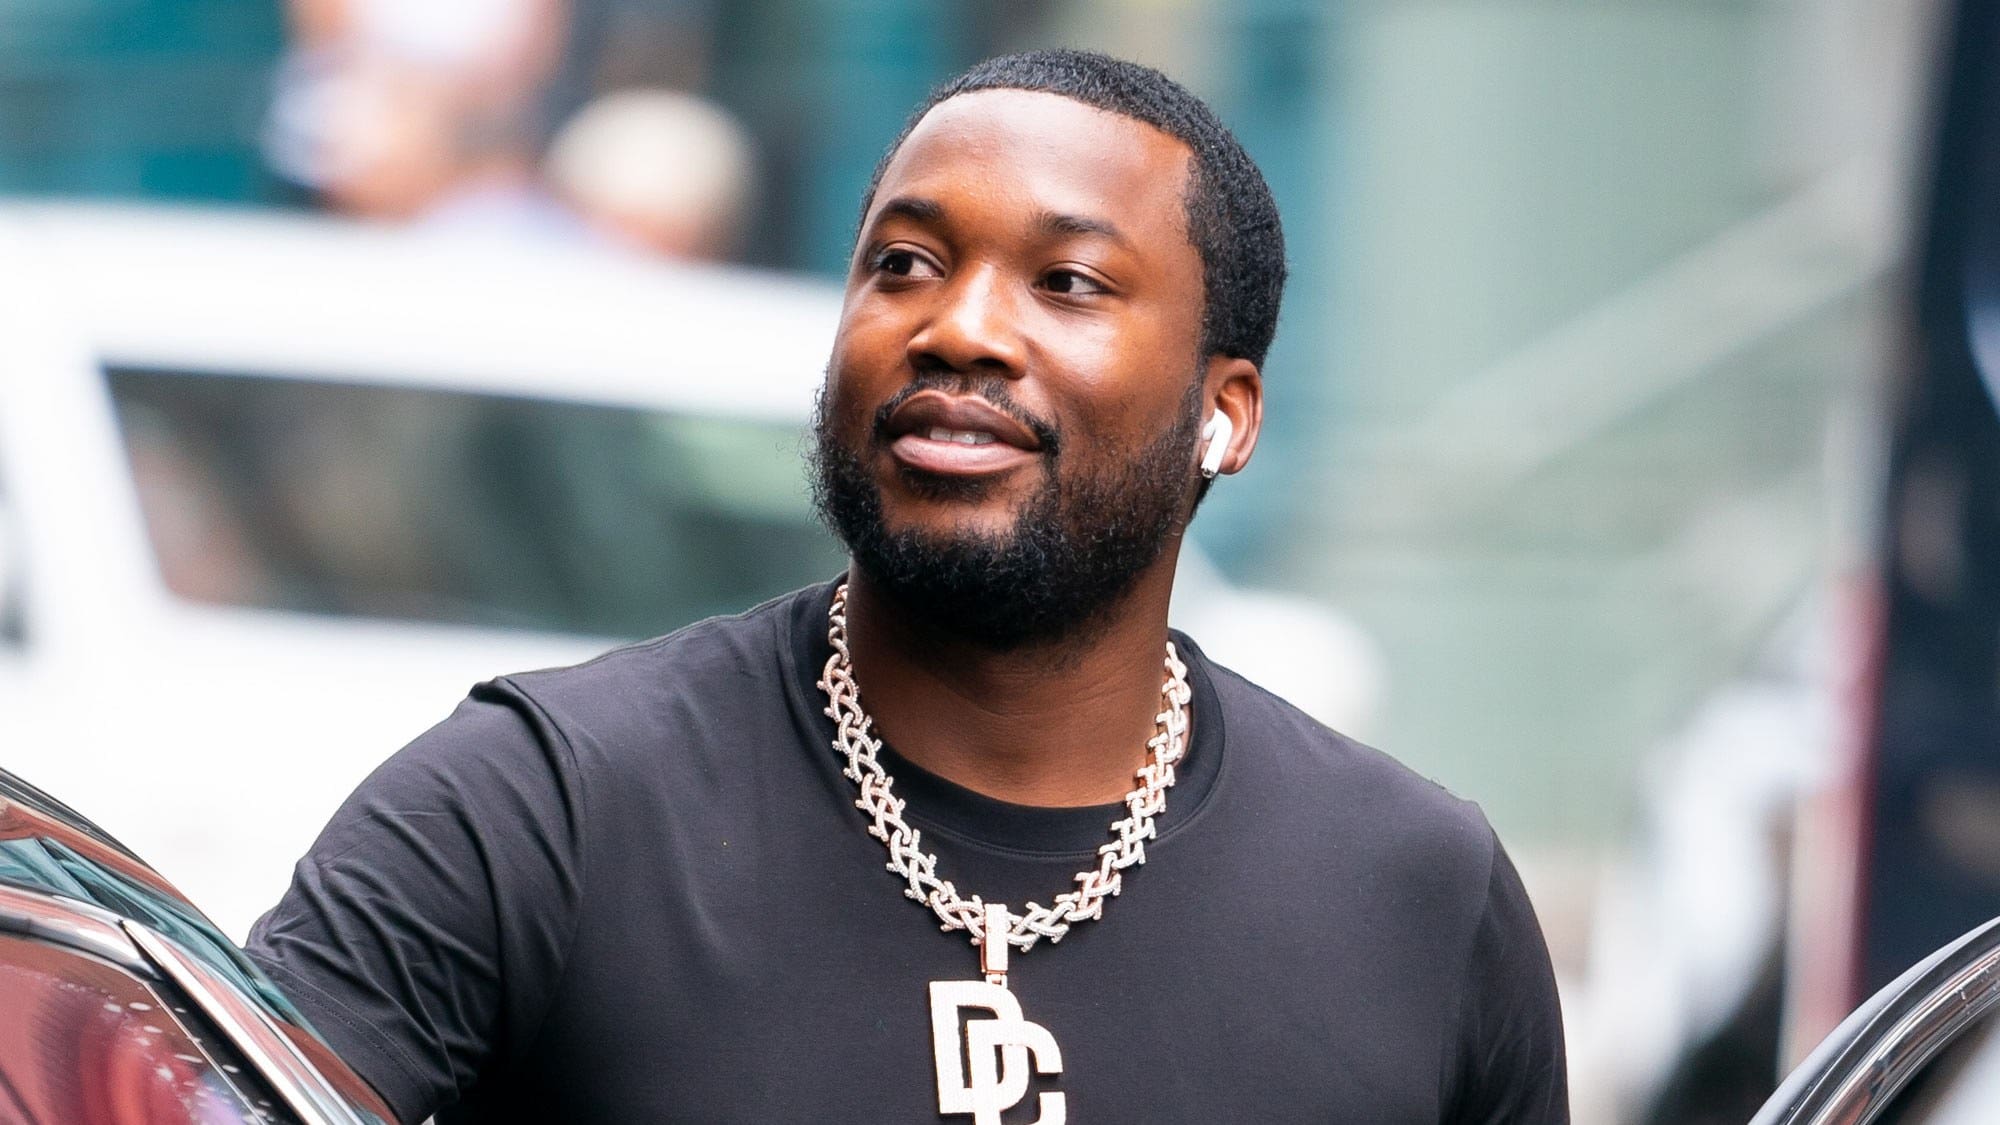 Meek Mill Has A Few Words About Broke Women And Men - See His Message Here